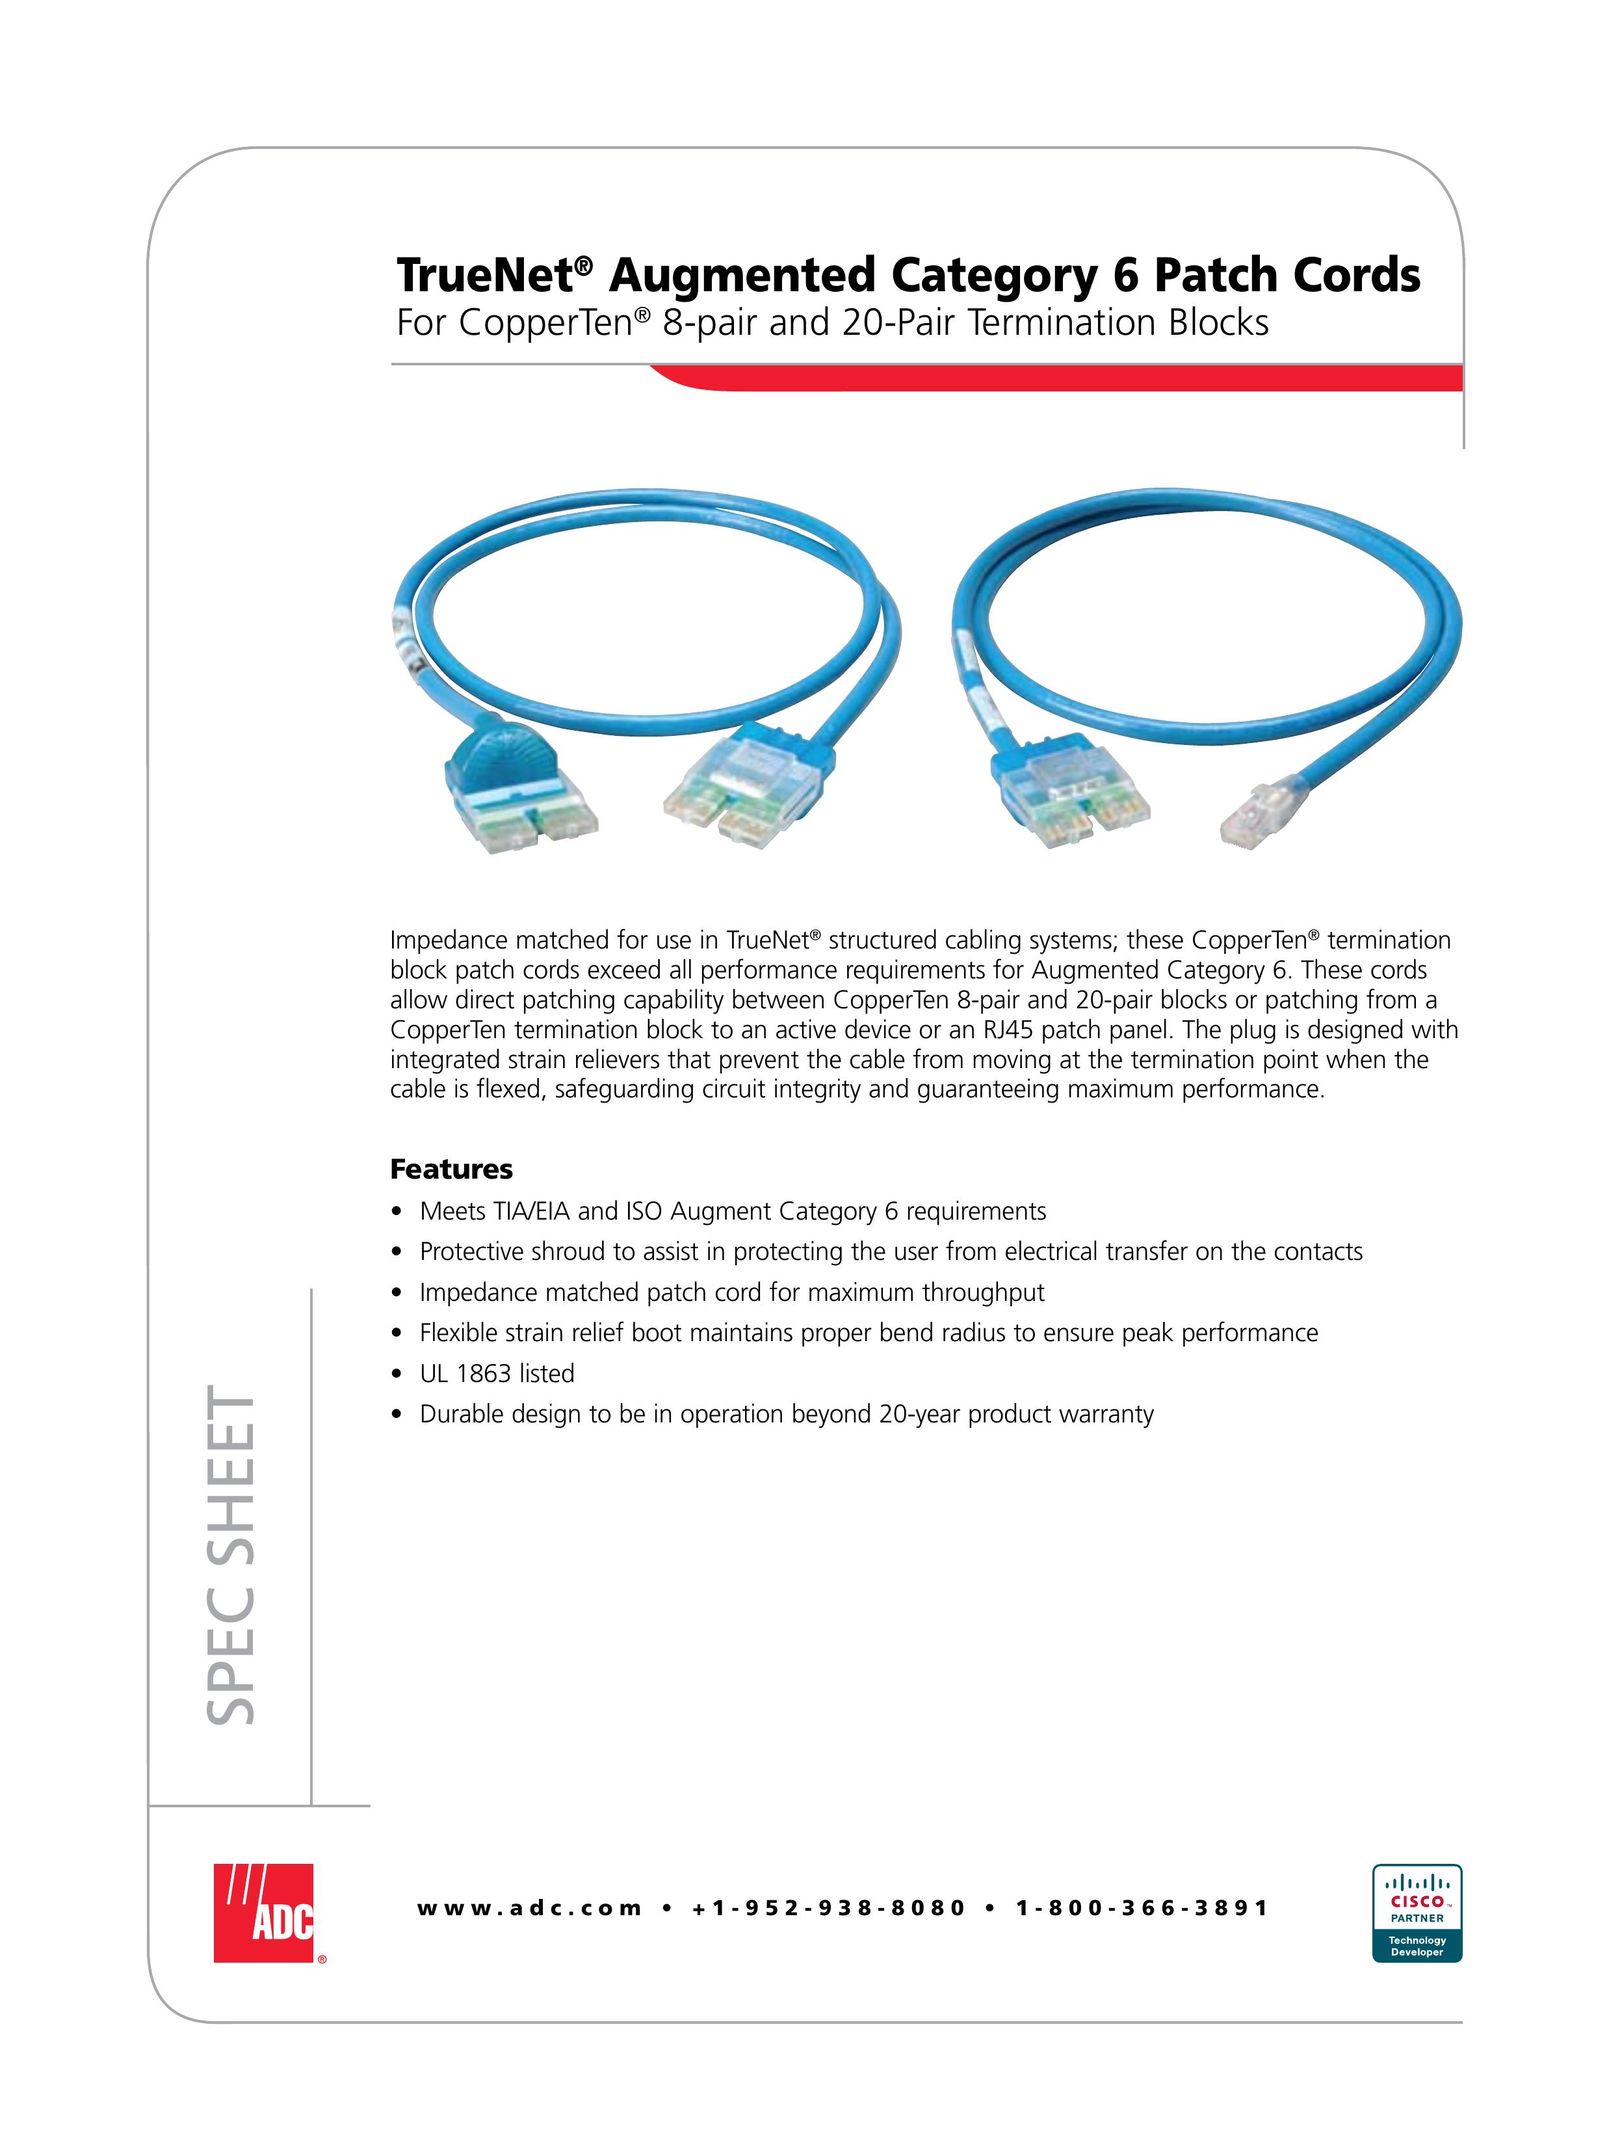 ADC Augmented Category 6 Patch Cords Network Router User Manual